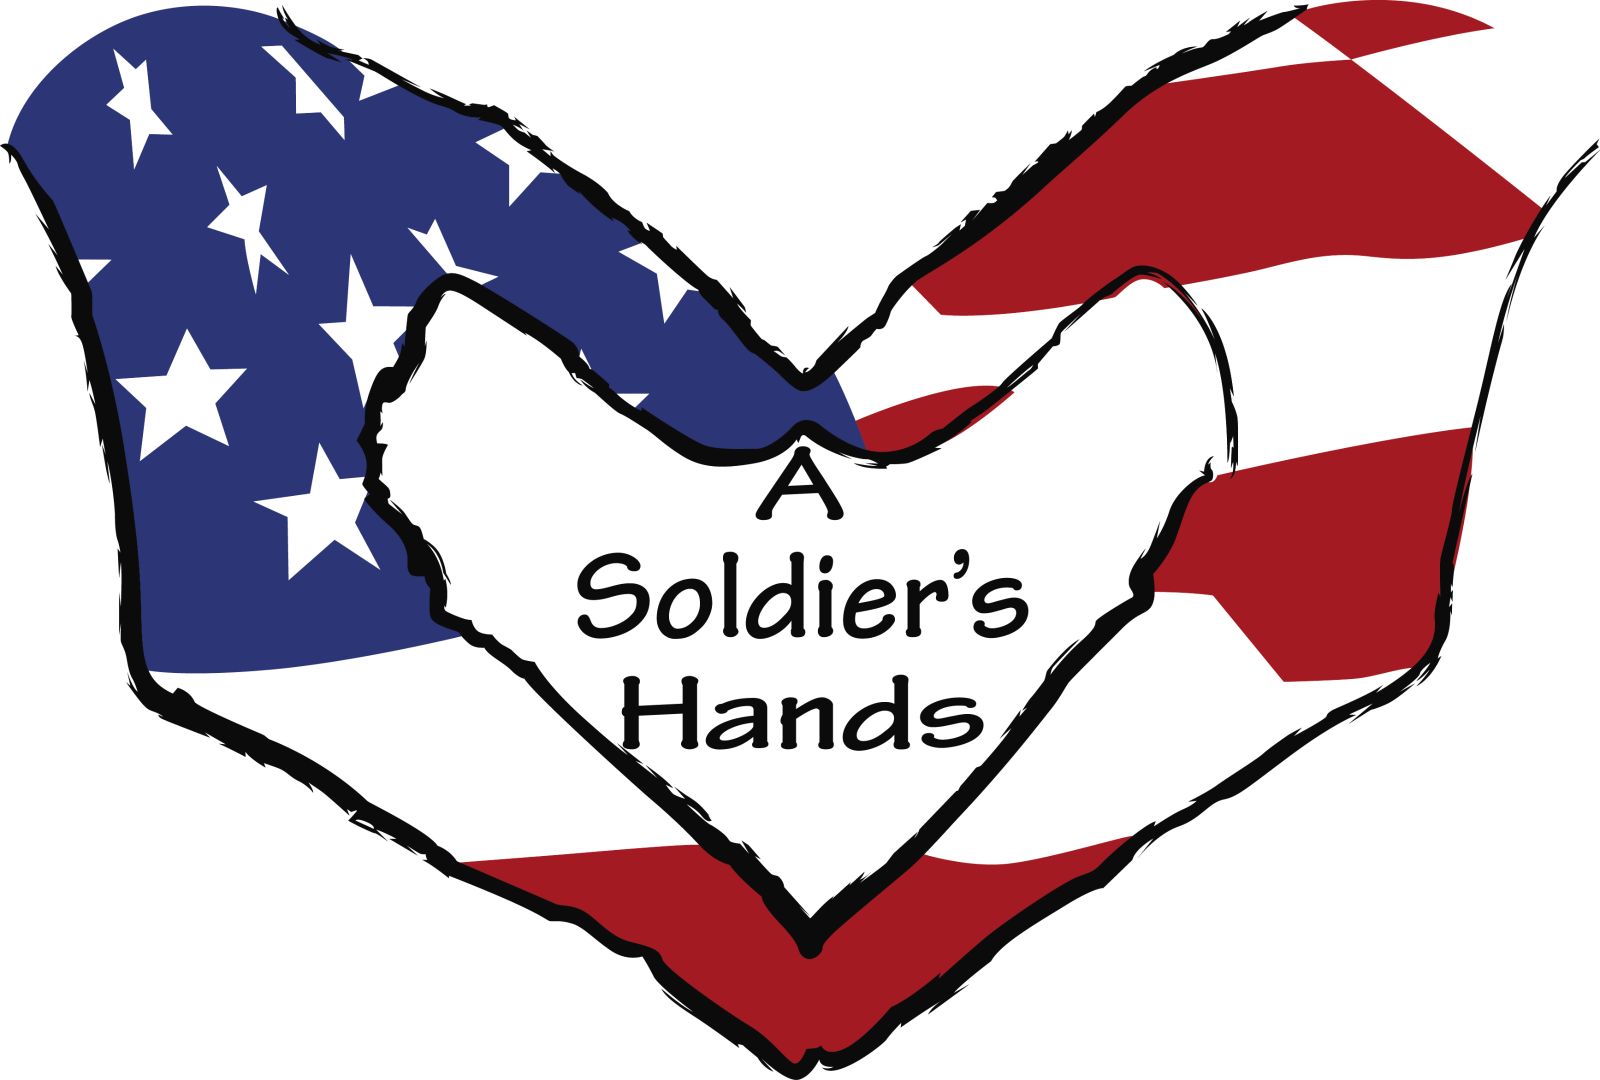 A-SOLDIERS-HANDS%20LOGO%20white4%20backgruond.jpg